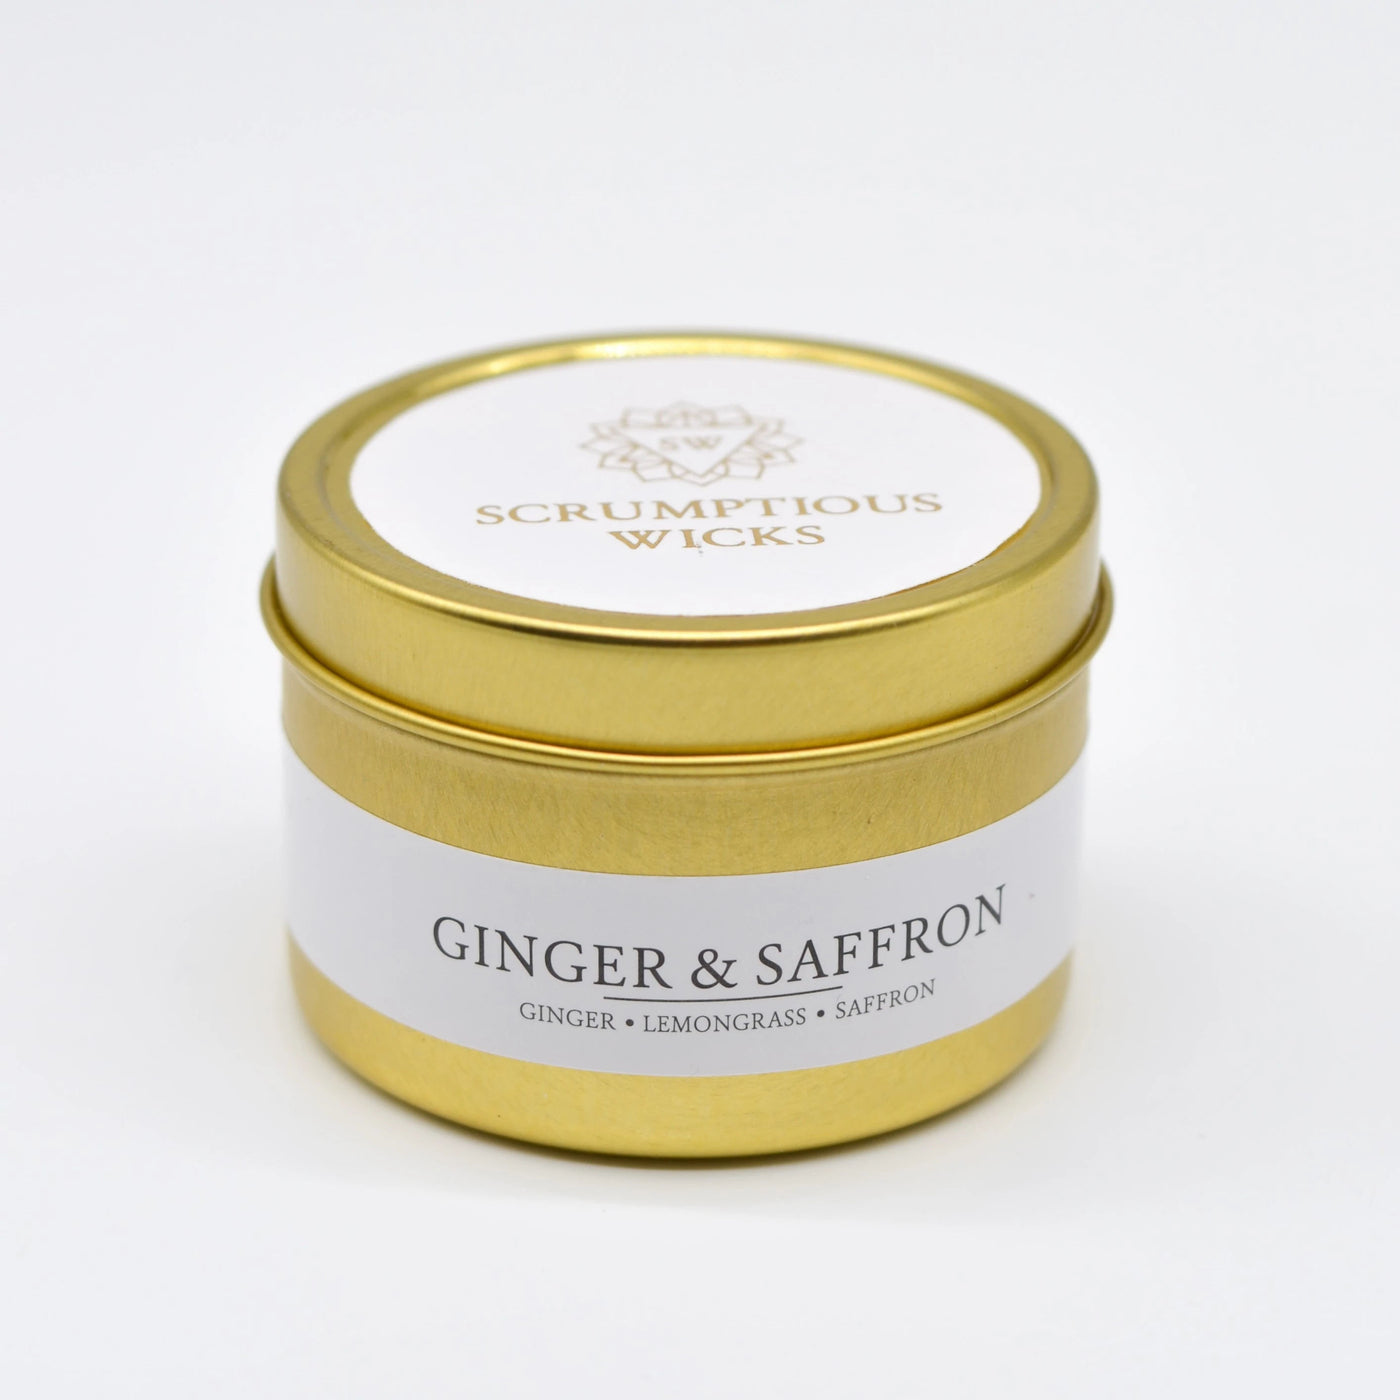 Ginger & Saffron Tin candle by Scrumptious Wicks